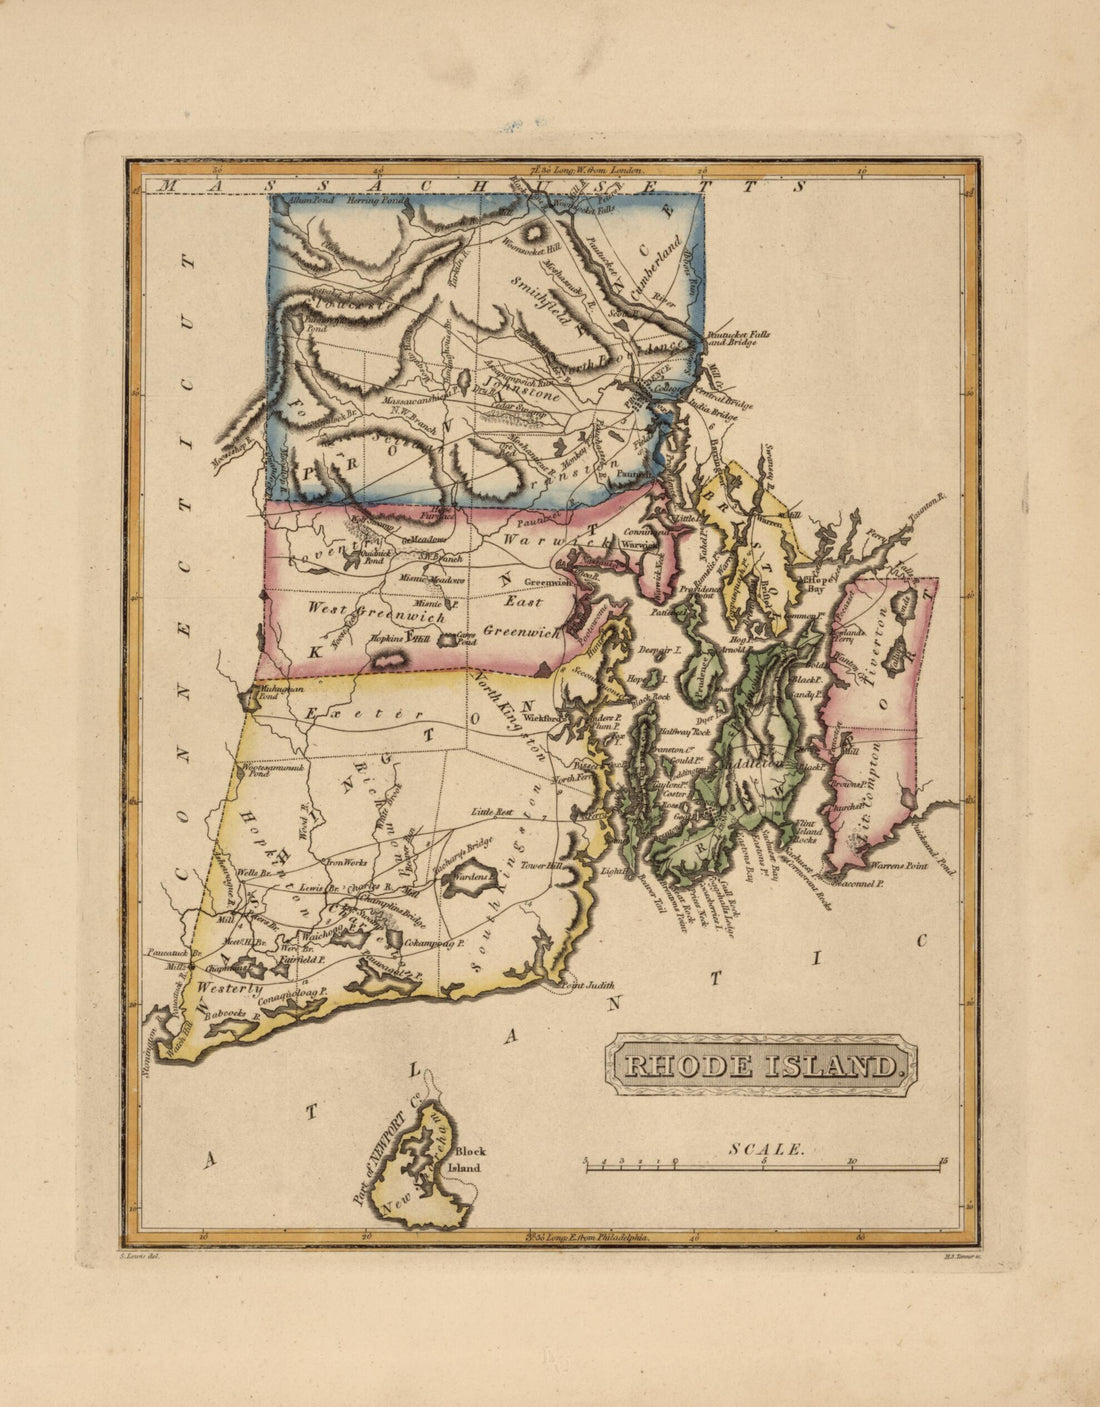 This old map of Rhode Island from a New and Elegant General Atlas, Containing Maps of Each of the United States. from 1817 was created by Henry Schenck Tanner in 1817